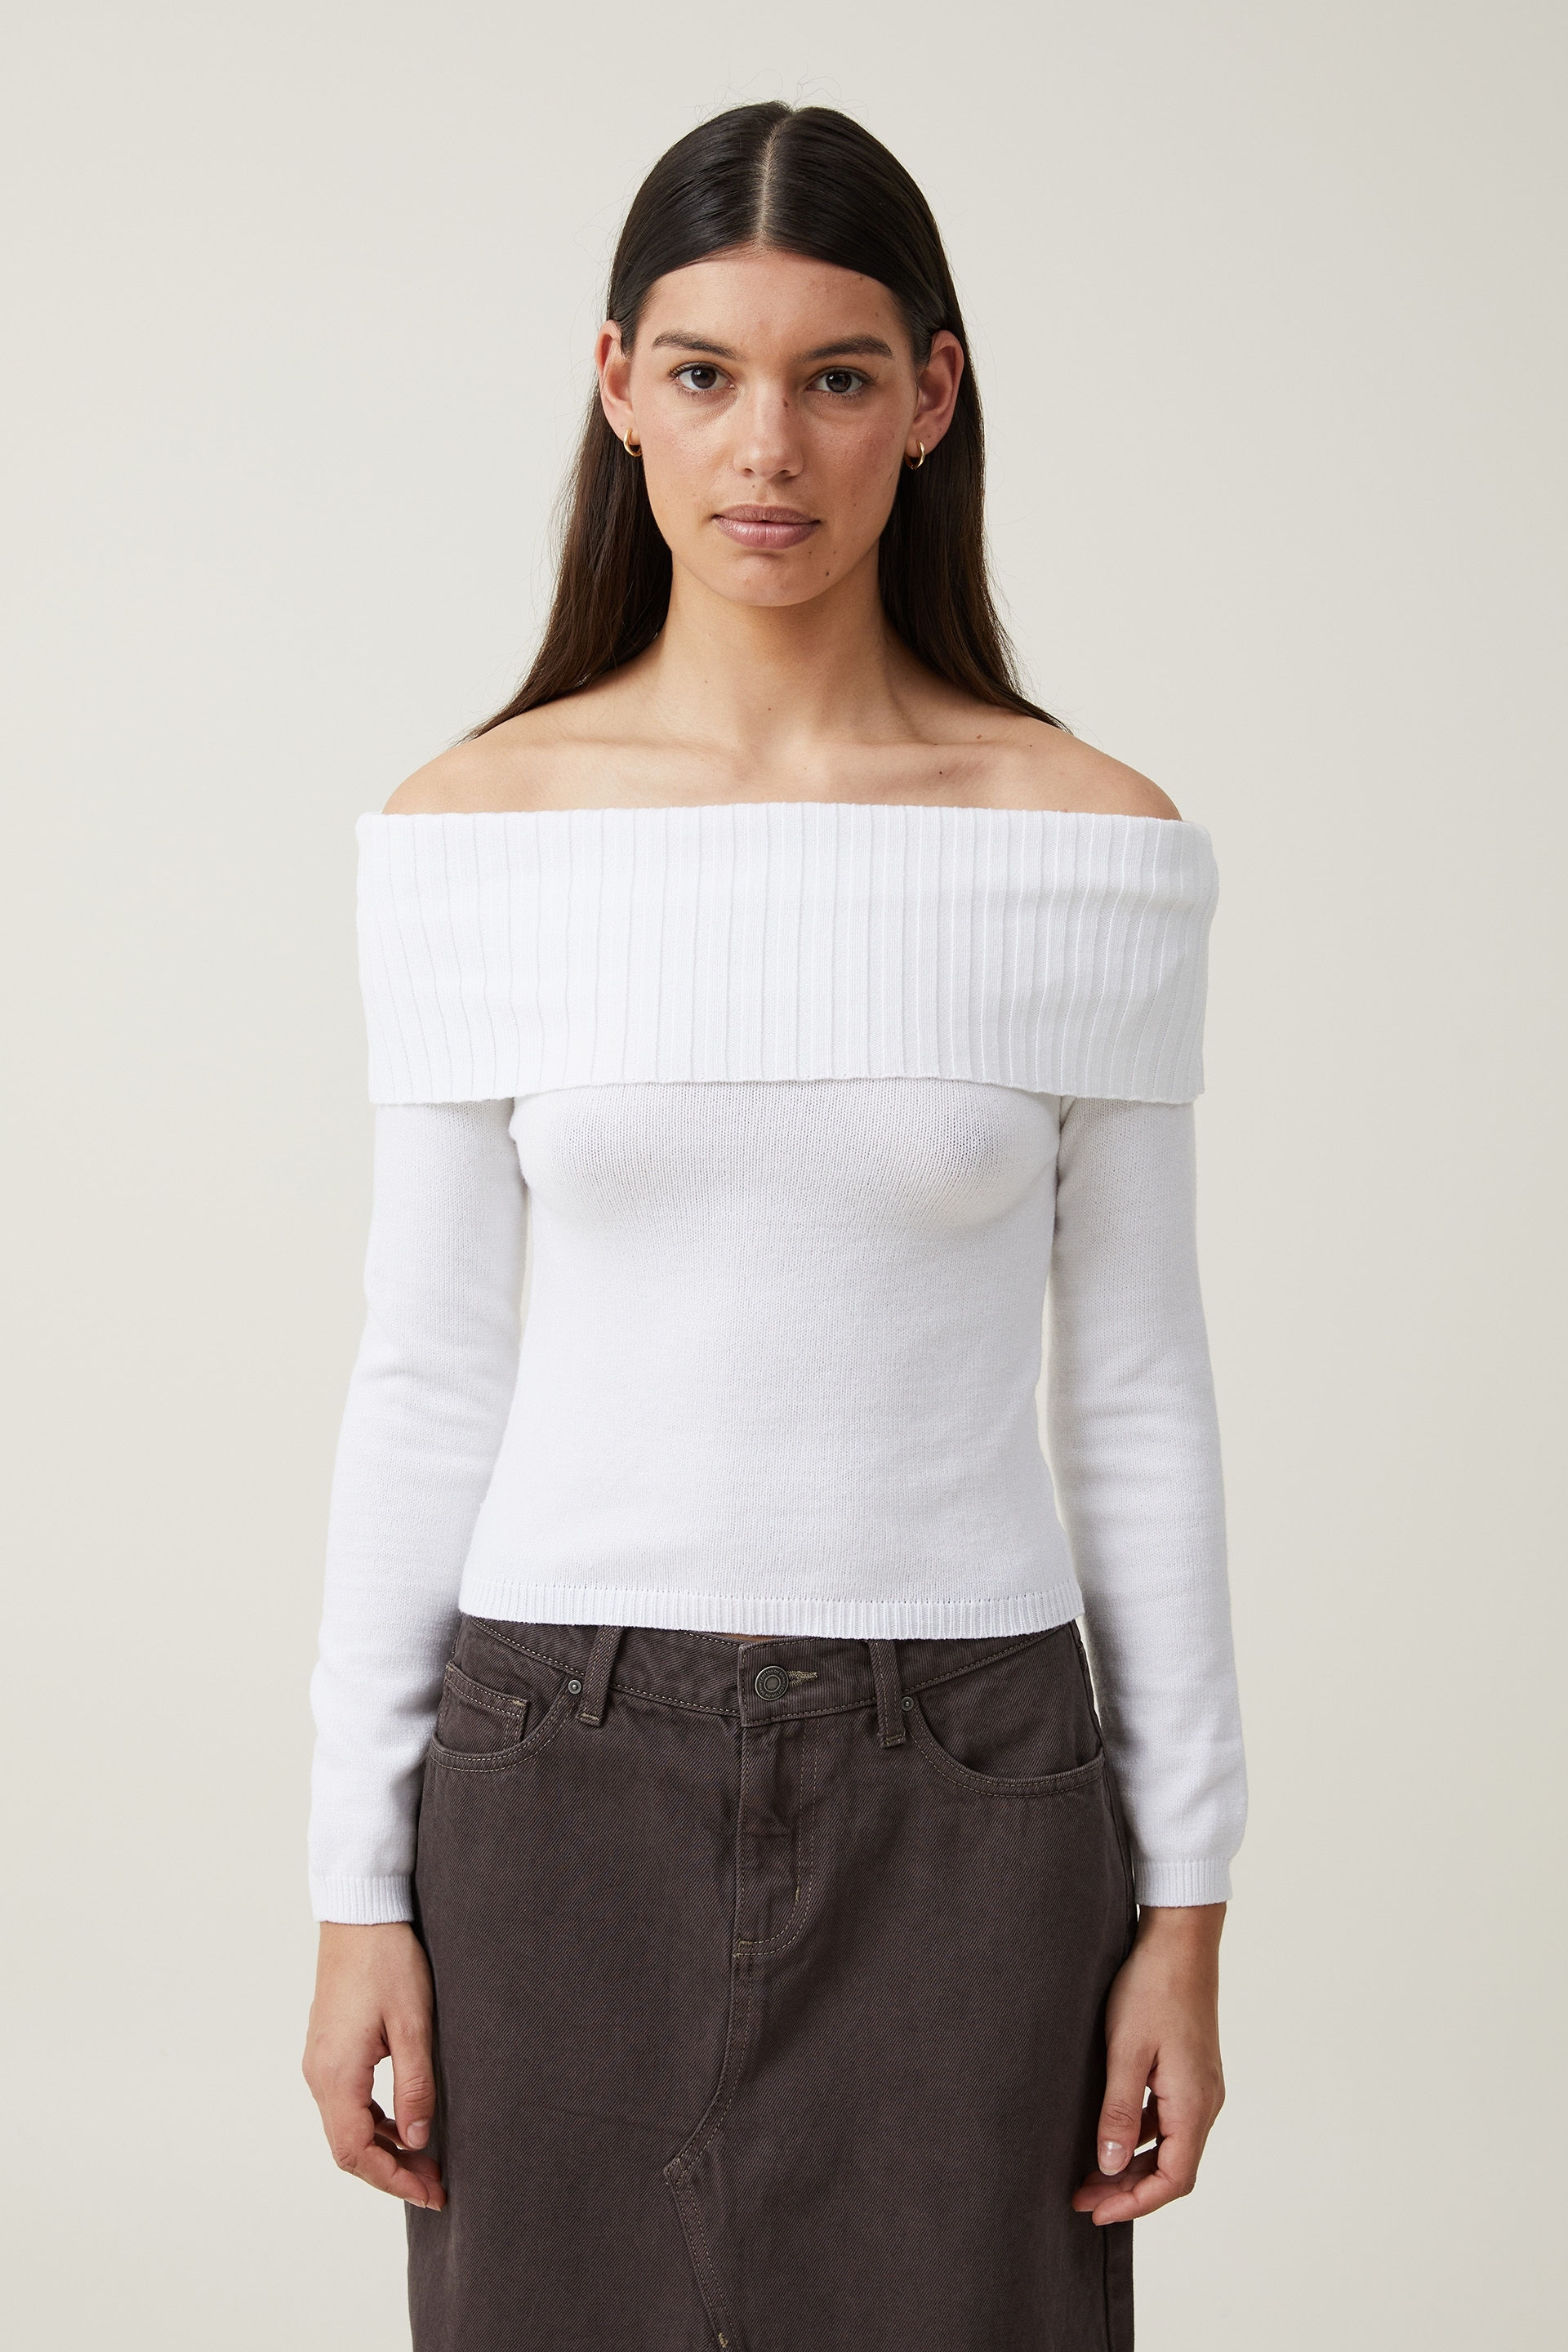 Cotton On Women - Everfine Off The Shoulder Pullover - White